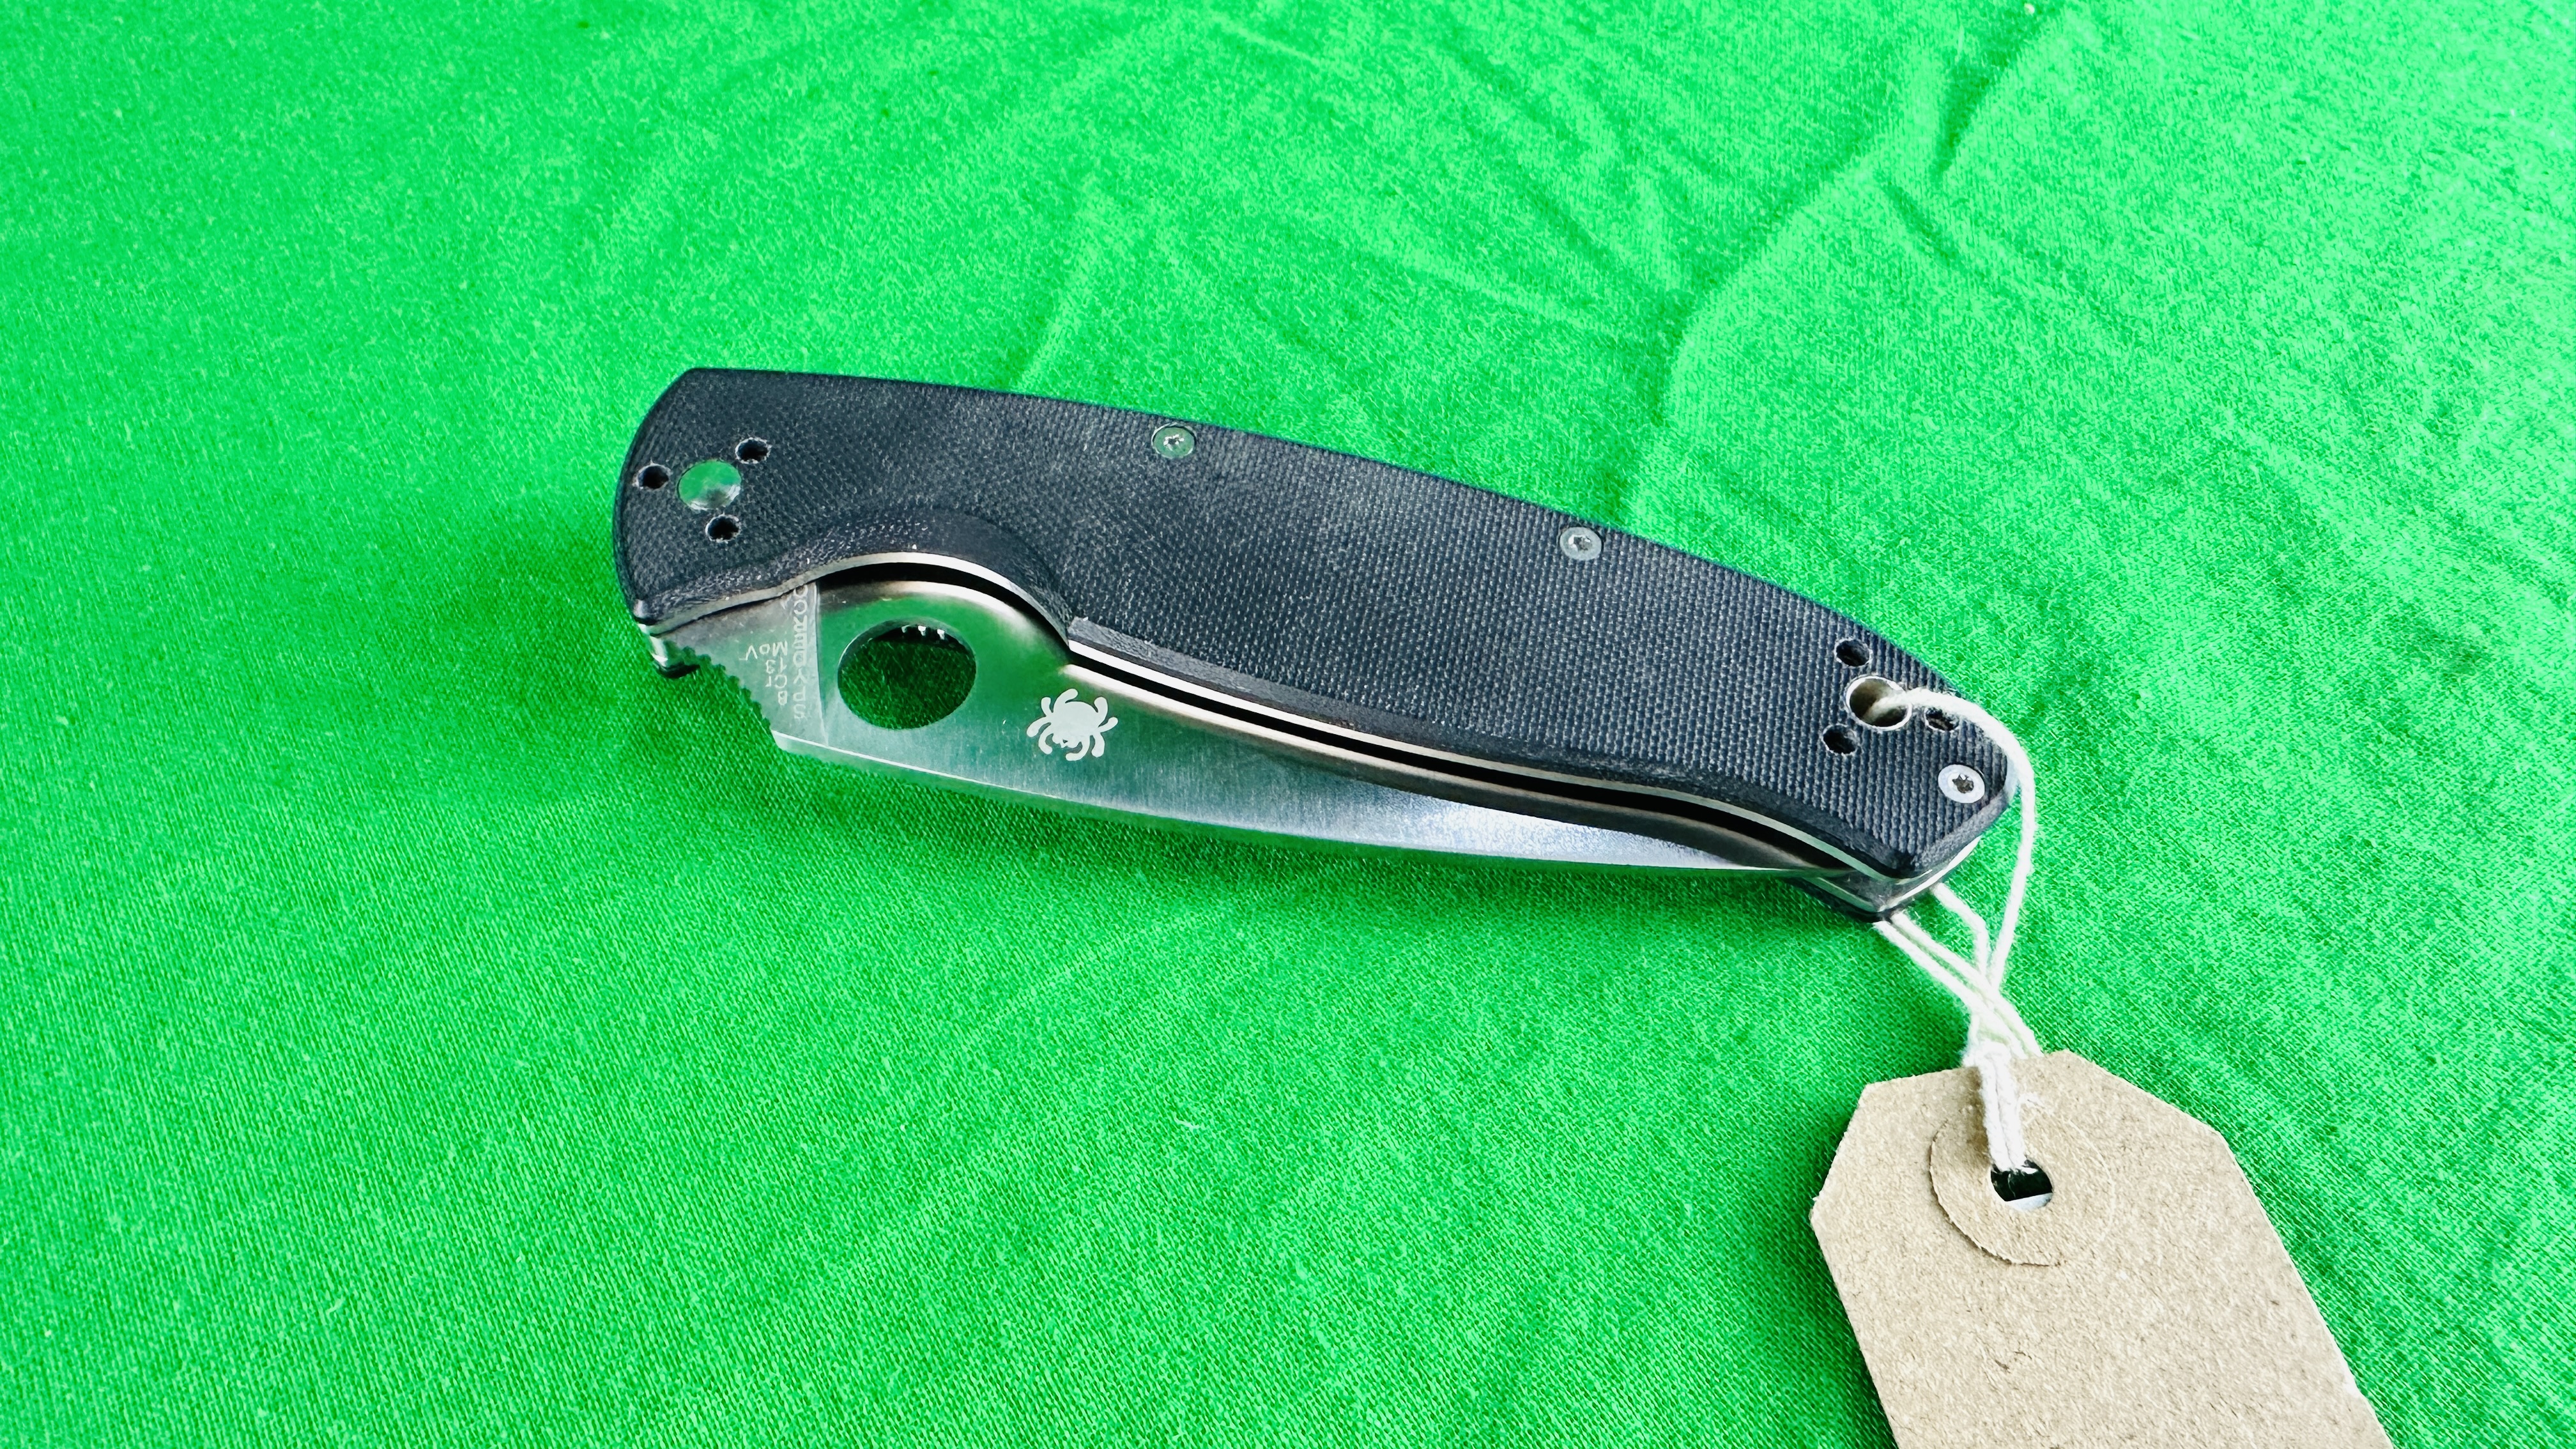 SYDERCO RESILIENCE C142GP FOLDING POCKET LOCK KNIFE - NO POSTAGE OR PACKING AVAILABLE - Image 7 of 7